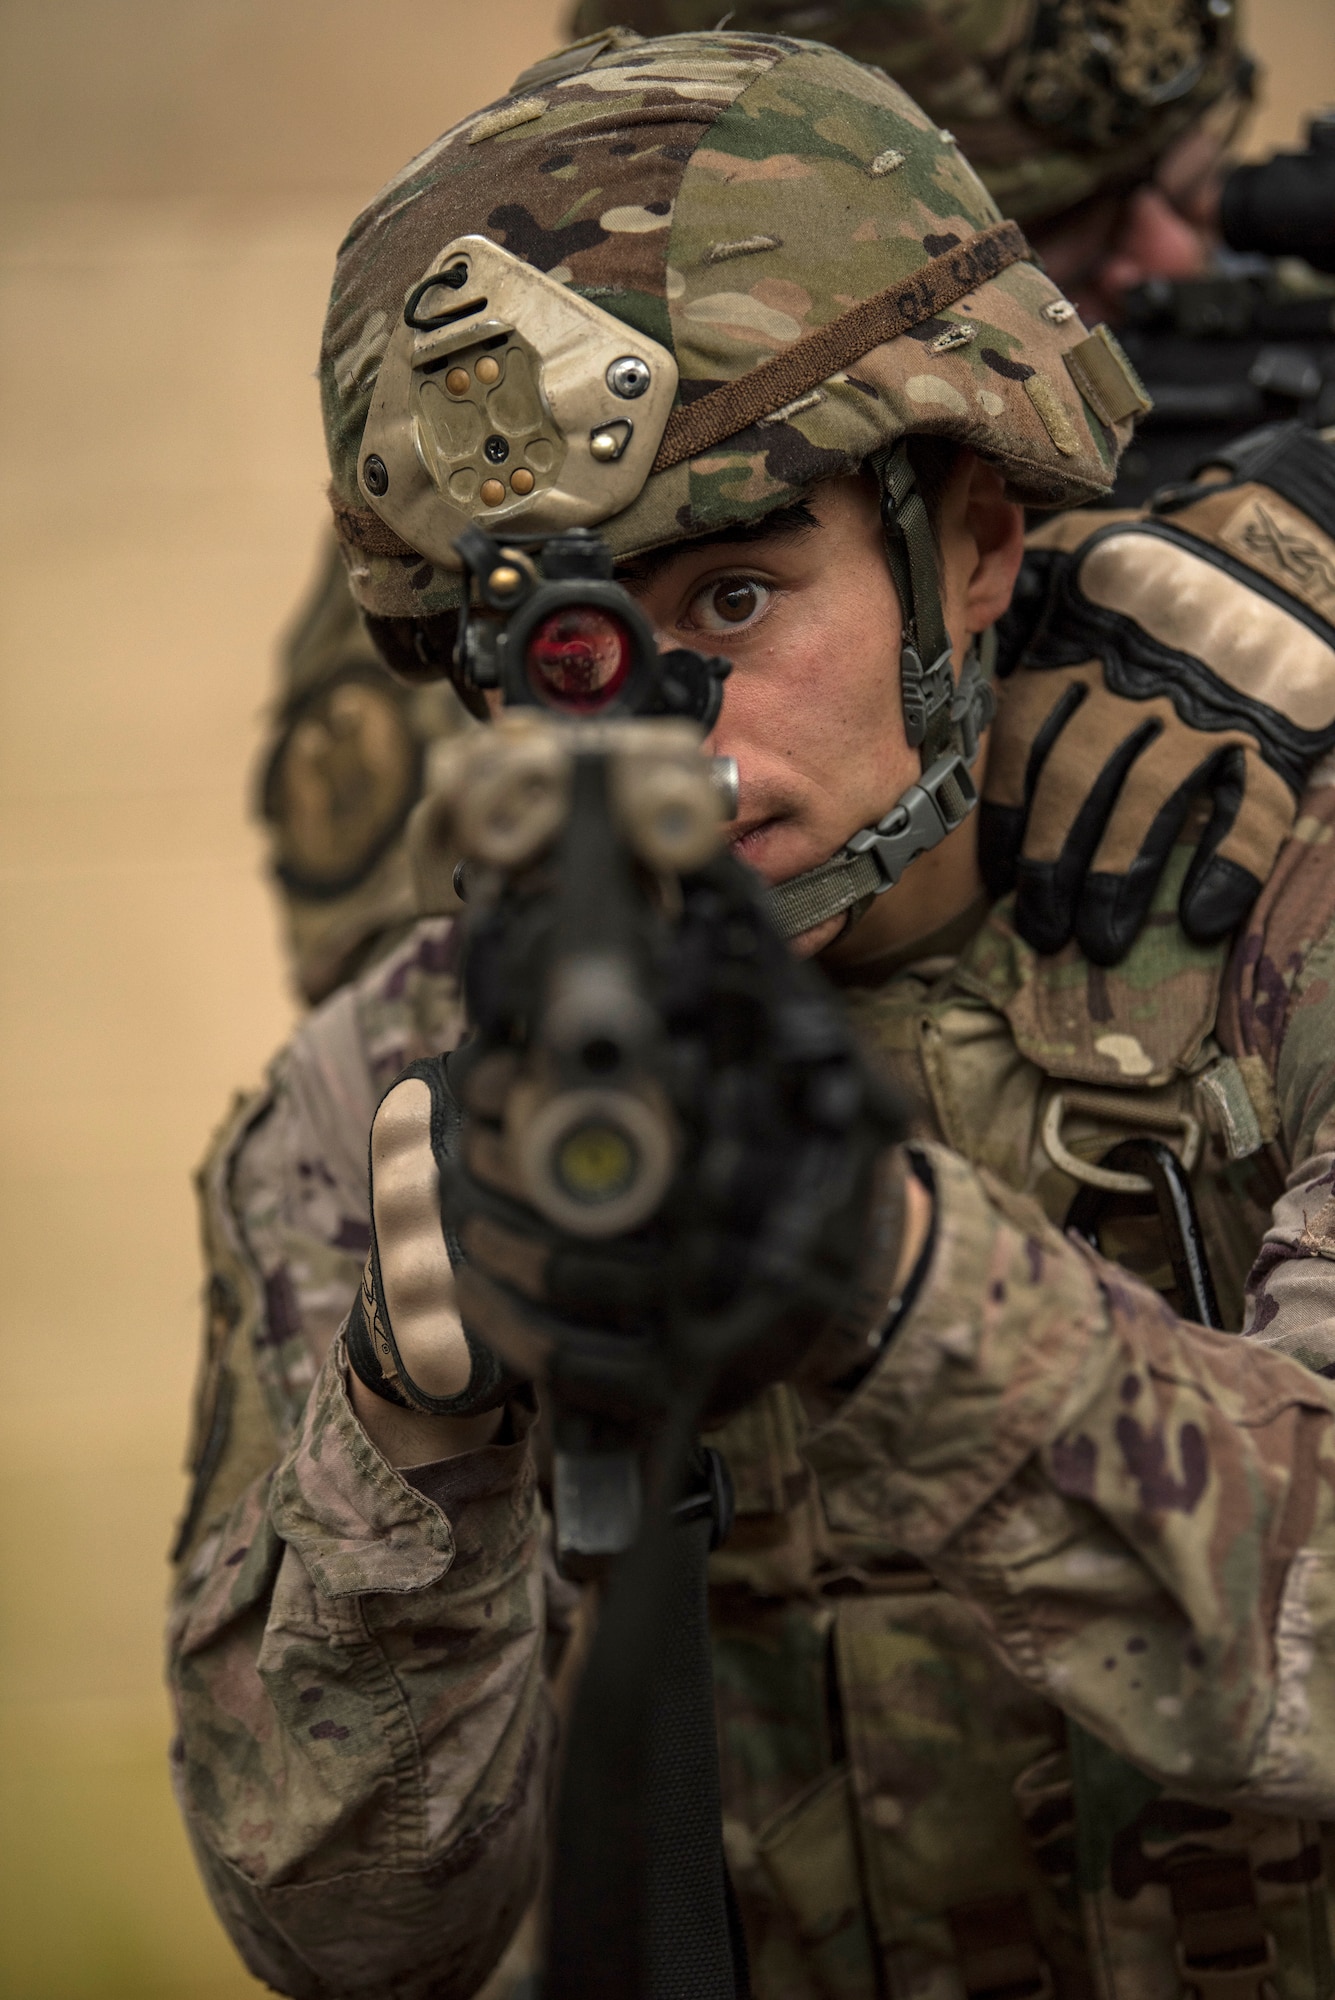 A member of the 823rd Base Defense Squadron looks through the optic of an M-4 carbine during a training scenario, Moody Air Force Base, Jan. 12, 2018. The 823rd is one of three operational security forces squadrons under the 820th Base Defense Group whose mission is to provide high-risk force protection and integrated base defense for expeditionary forces. (U.S. Air Force photo by Bennie J. Davis III)